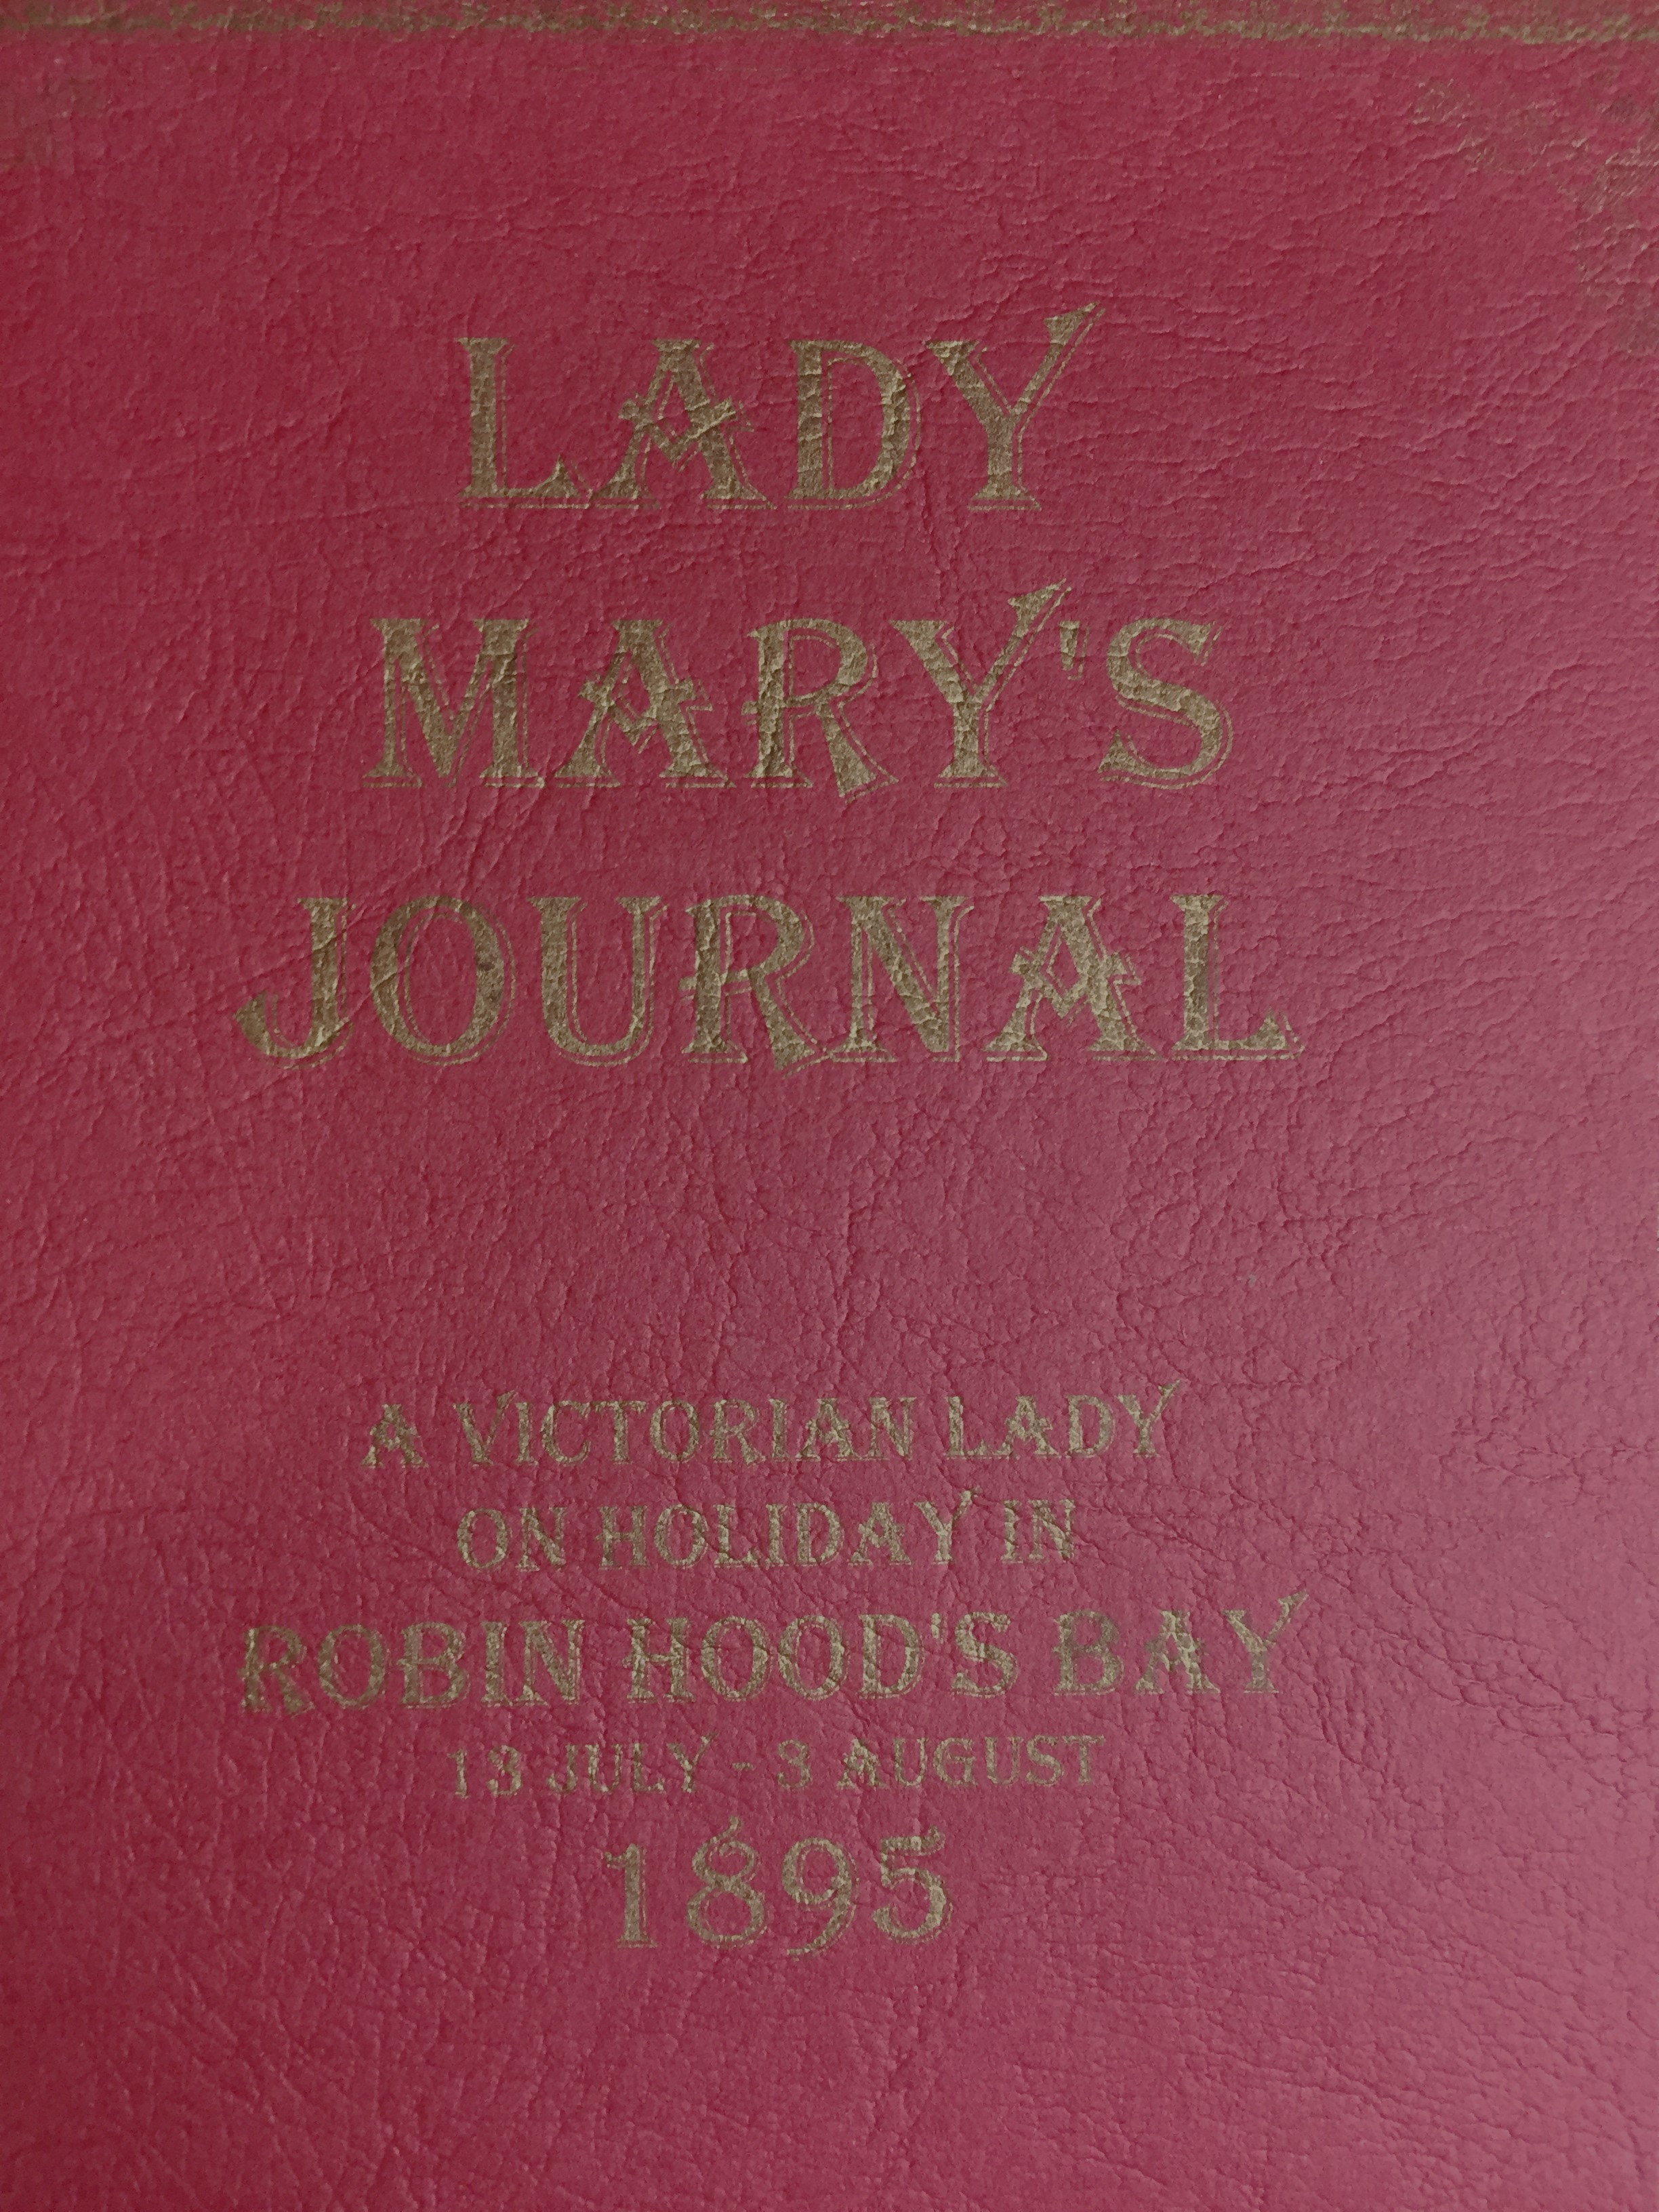 Contents to orange plastic crate - seventeen books including Lady Mary's Journal Victorian Lady in - Image 2 of 4